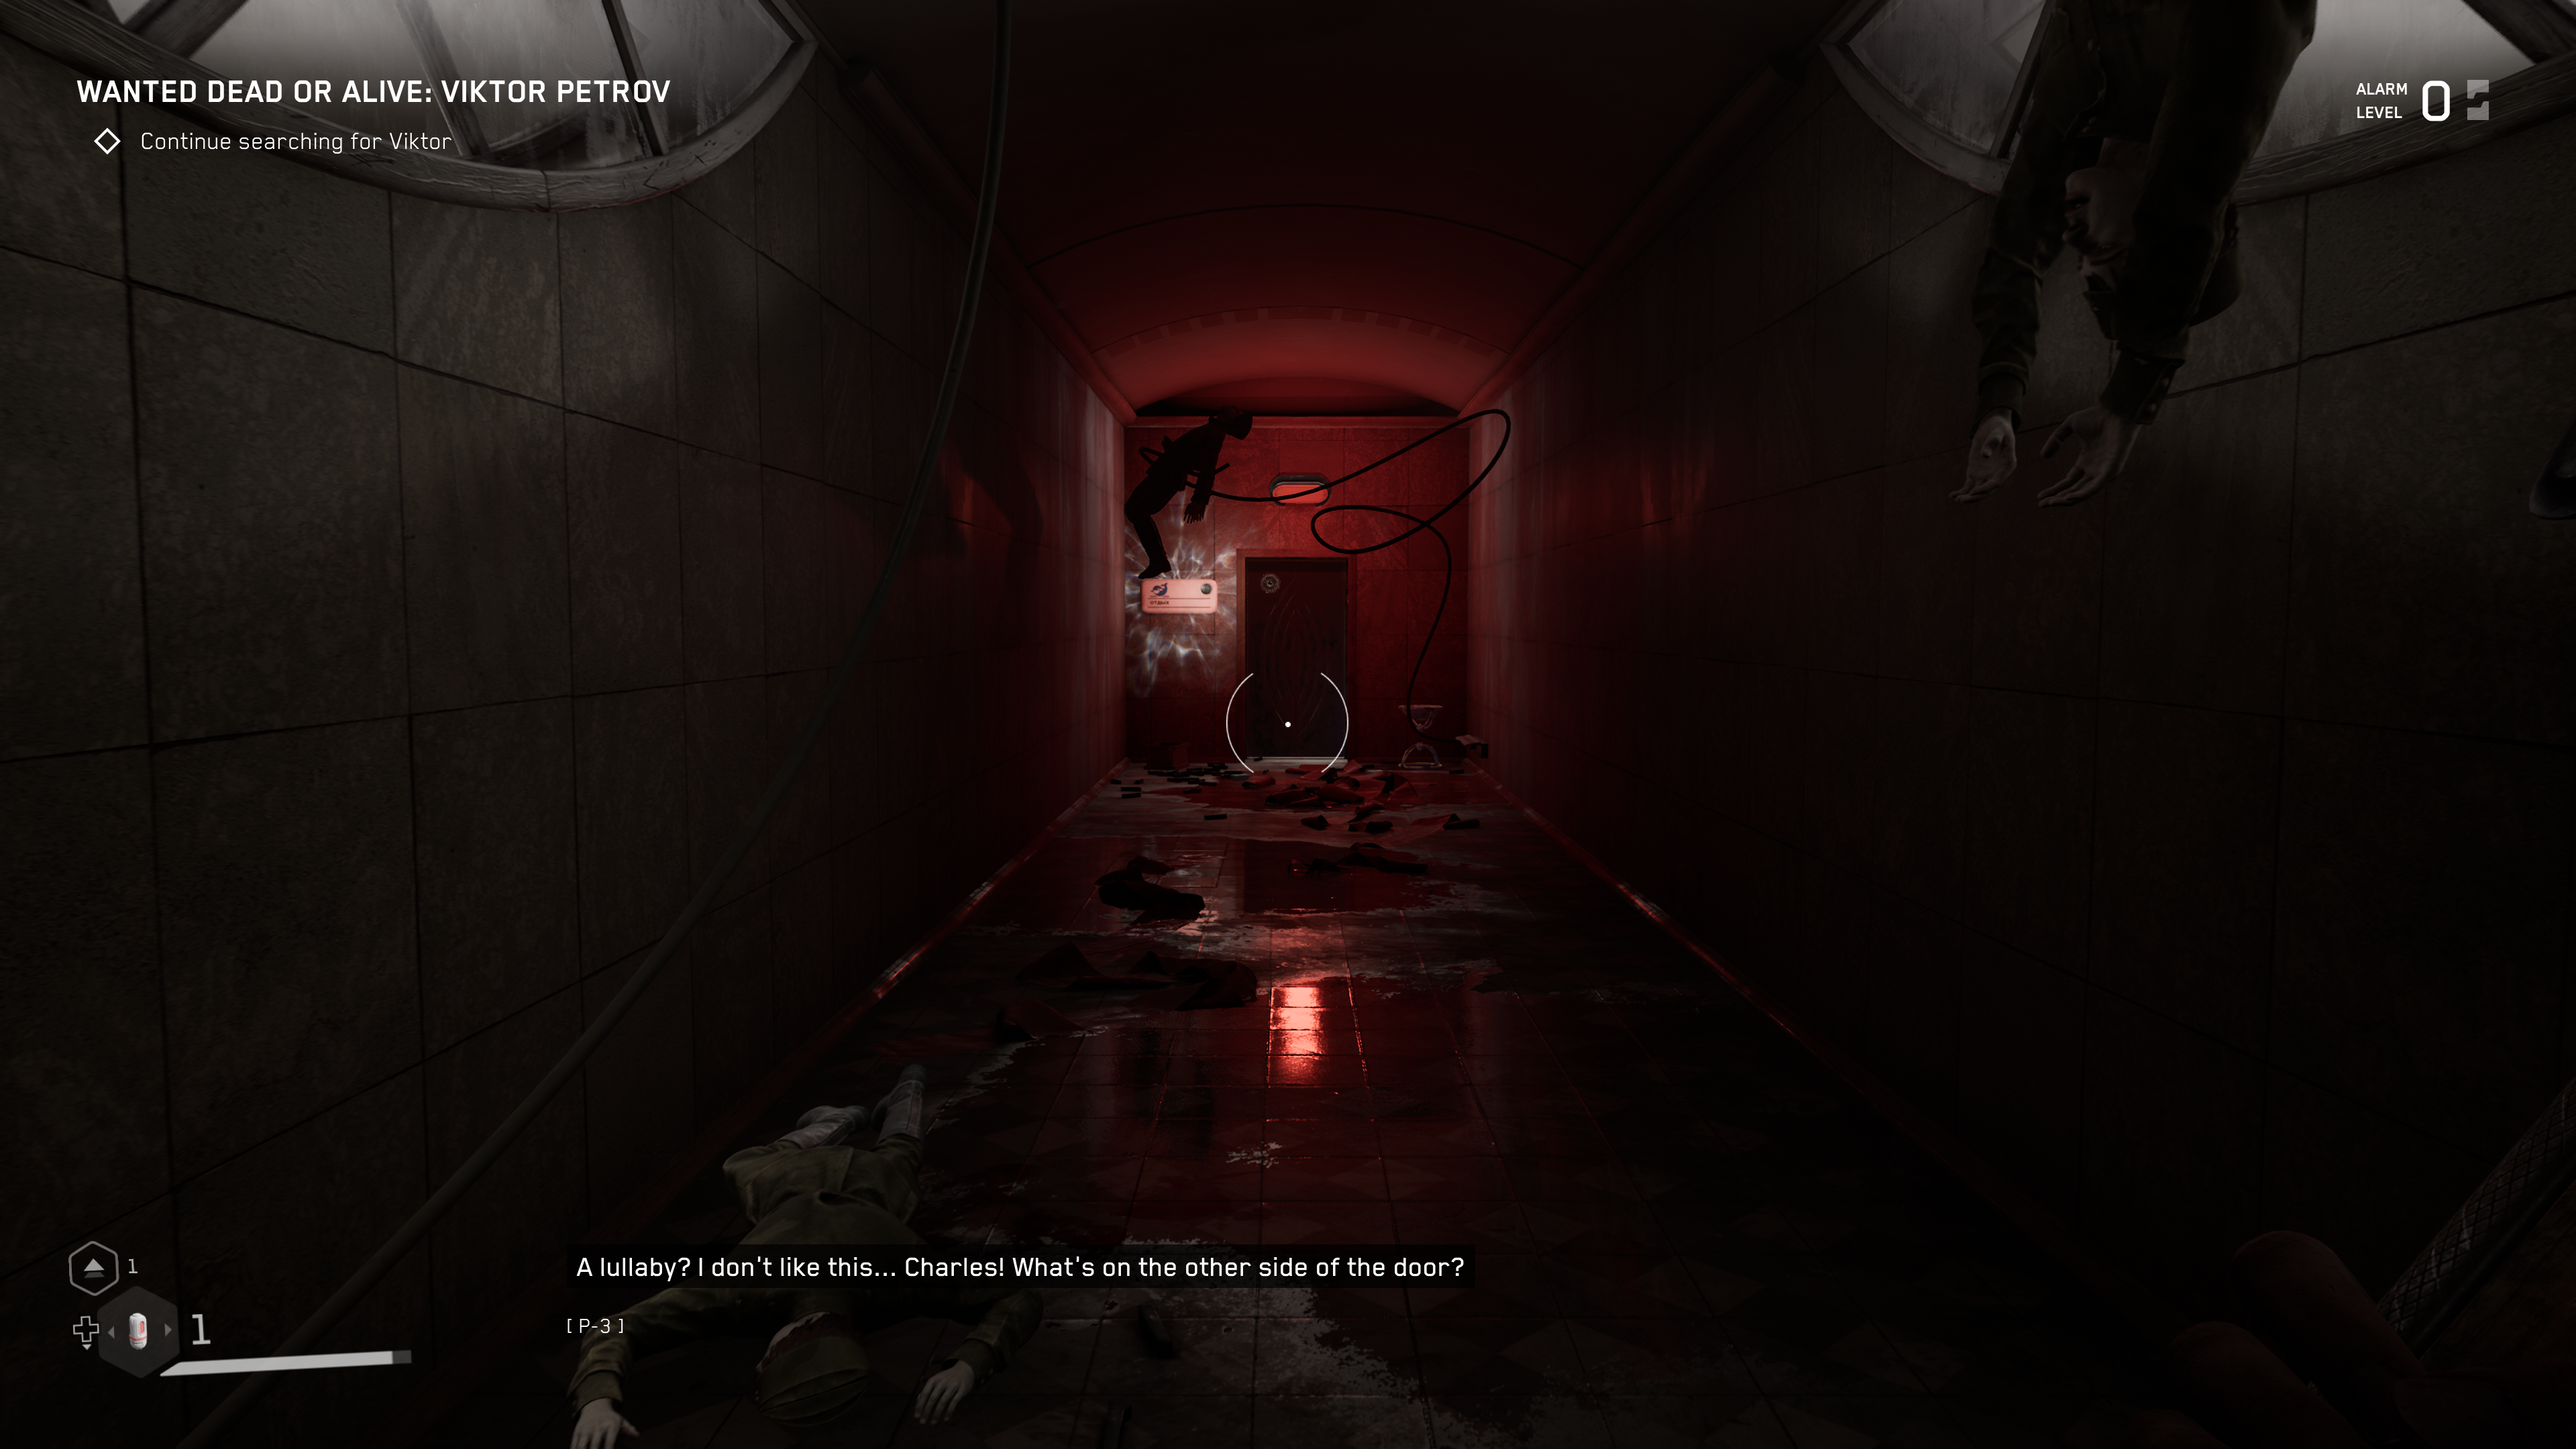 Atomic Heart review - a spooky dark corridor with an impaled body at the end glowing red, giving horror vibes